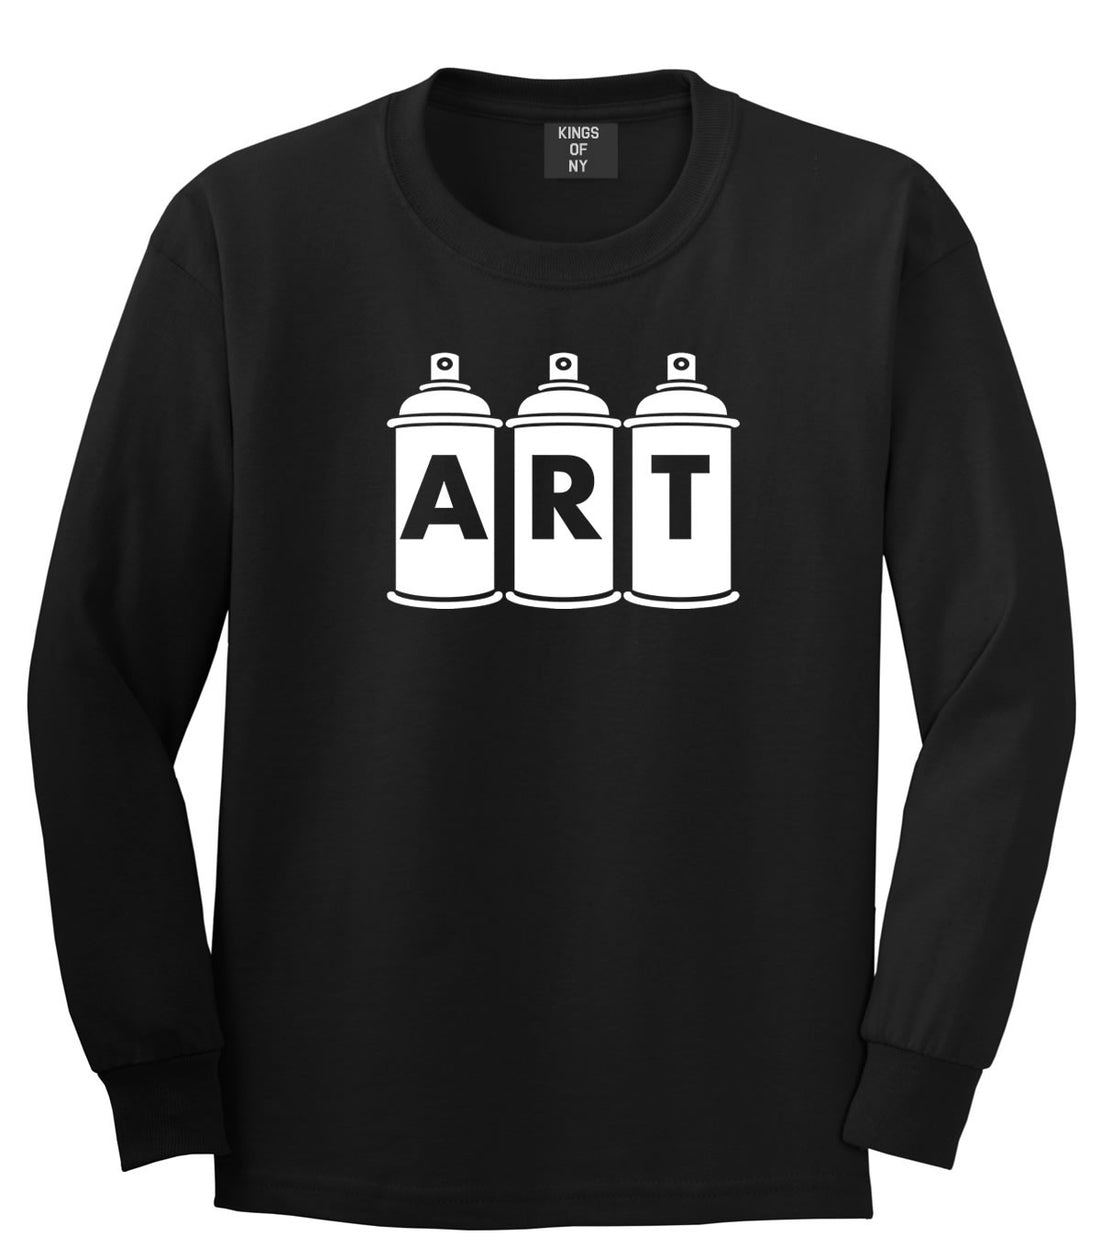 Art graf graffiti spray can paint artist Long Sleeve T-Shirt in Black By Kings Of NY